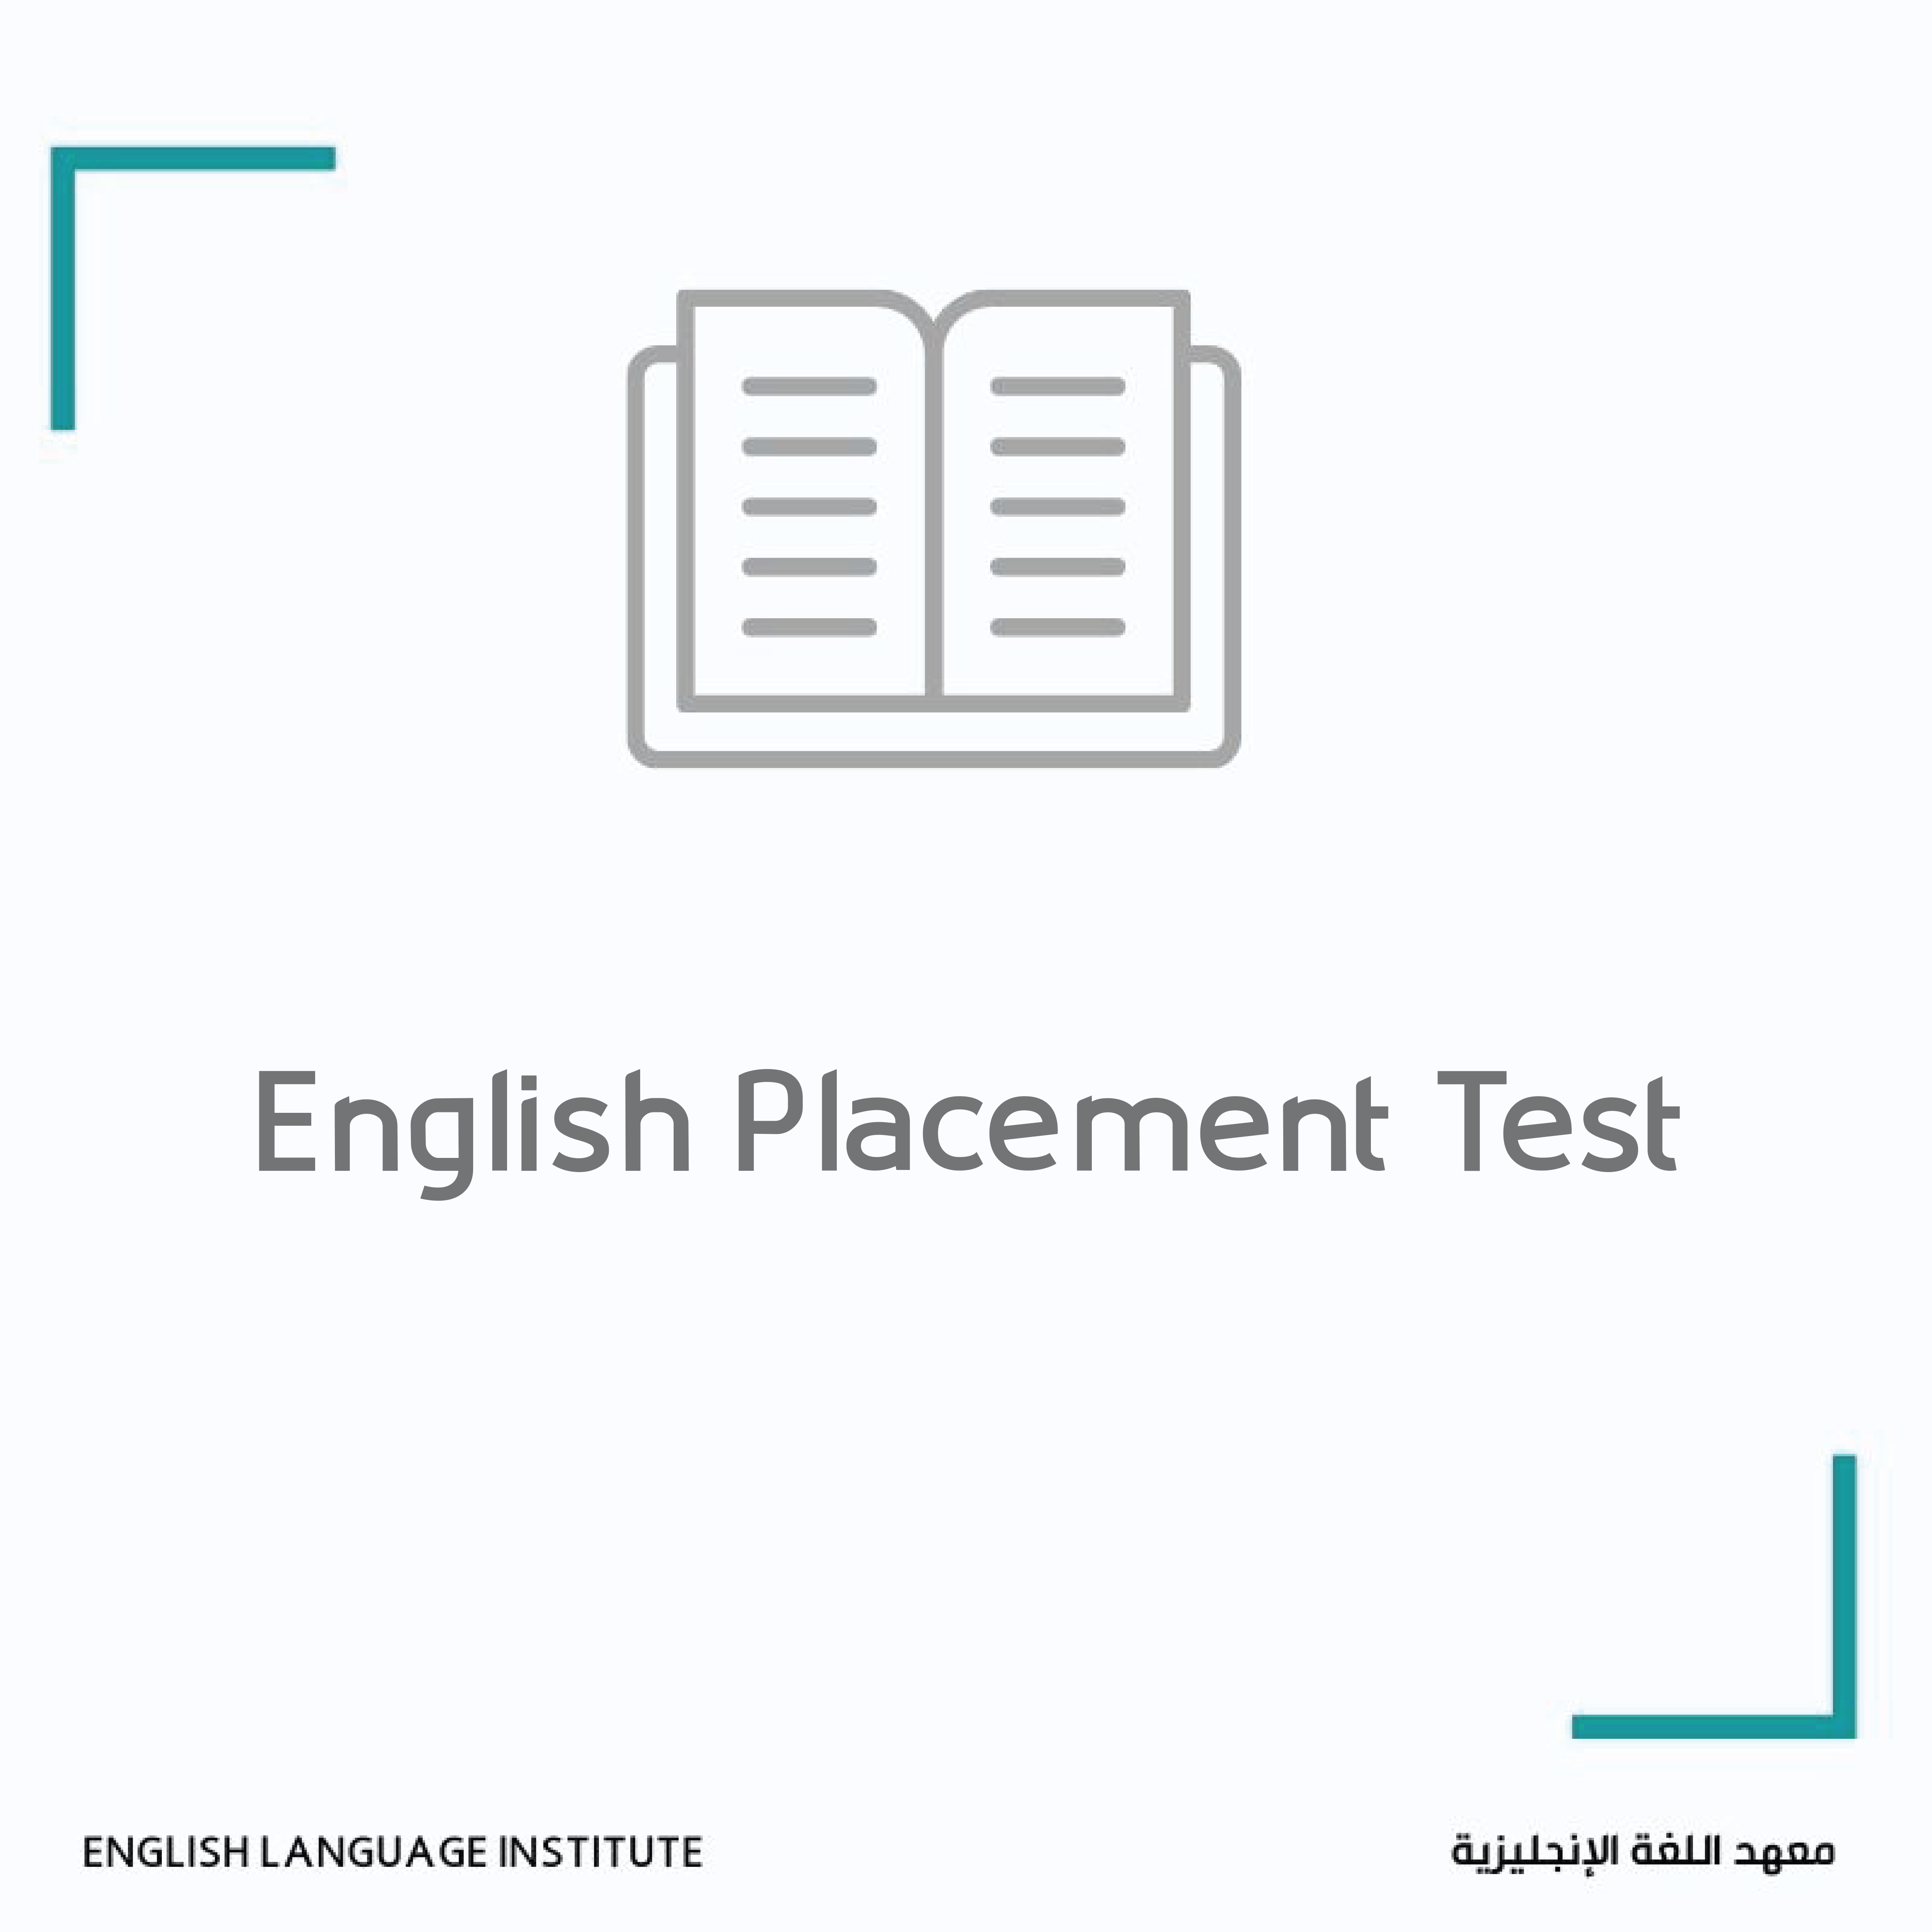 English Placement Test.png